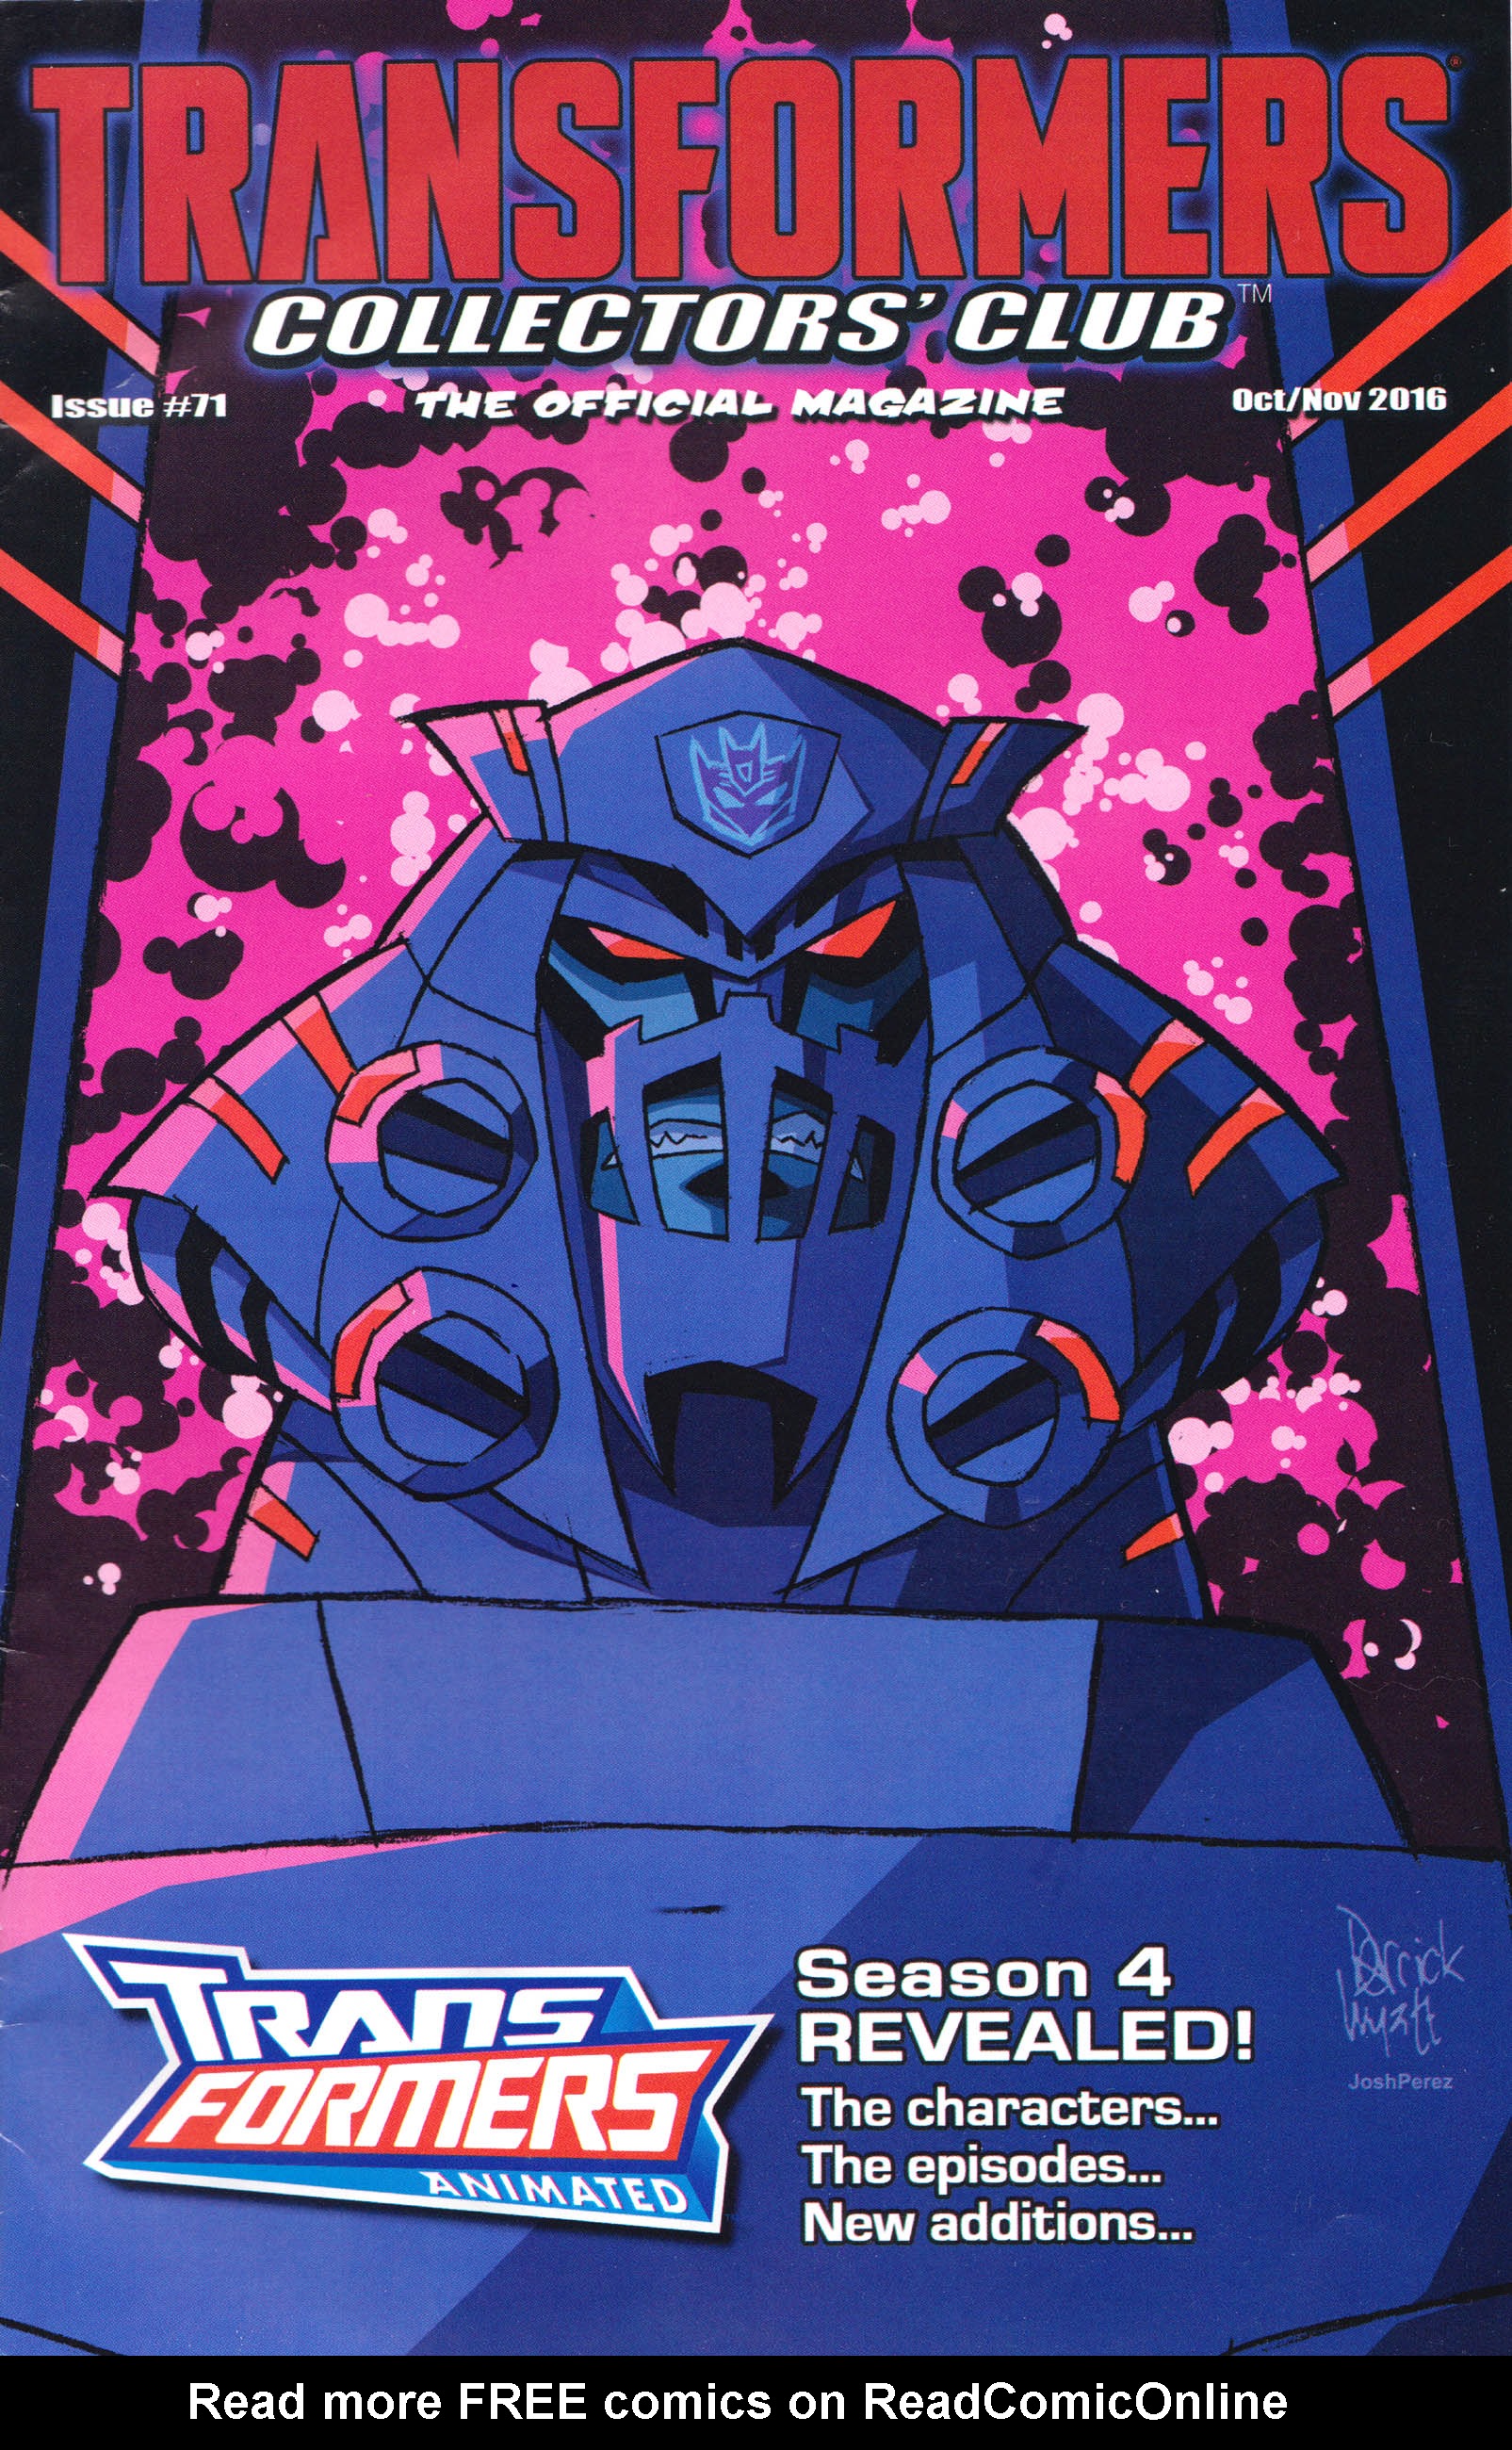 Read online Transformers: Collectors' Club comic -  Issue #71 - 1